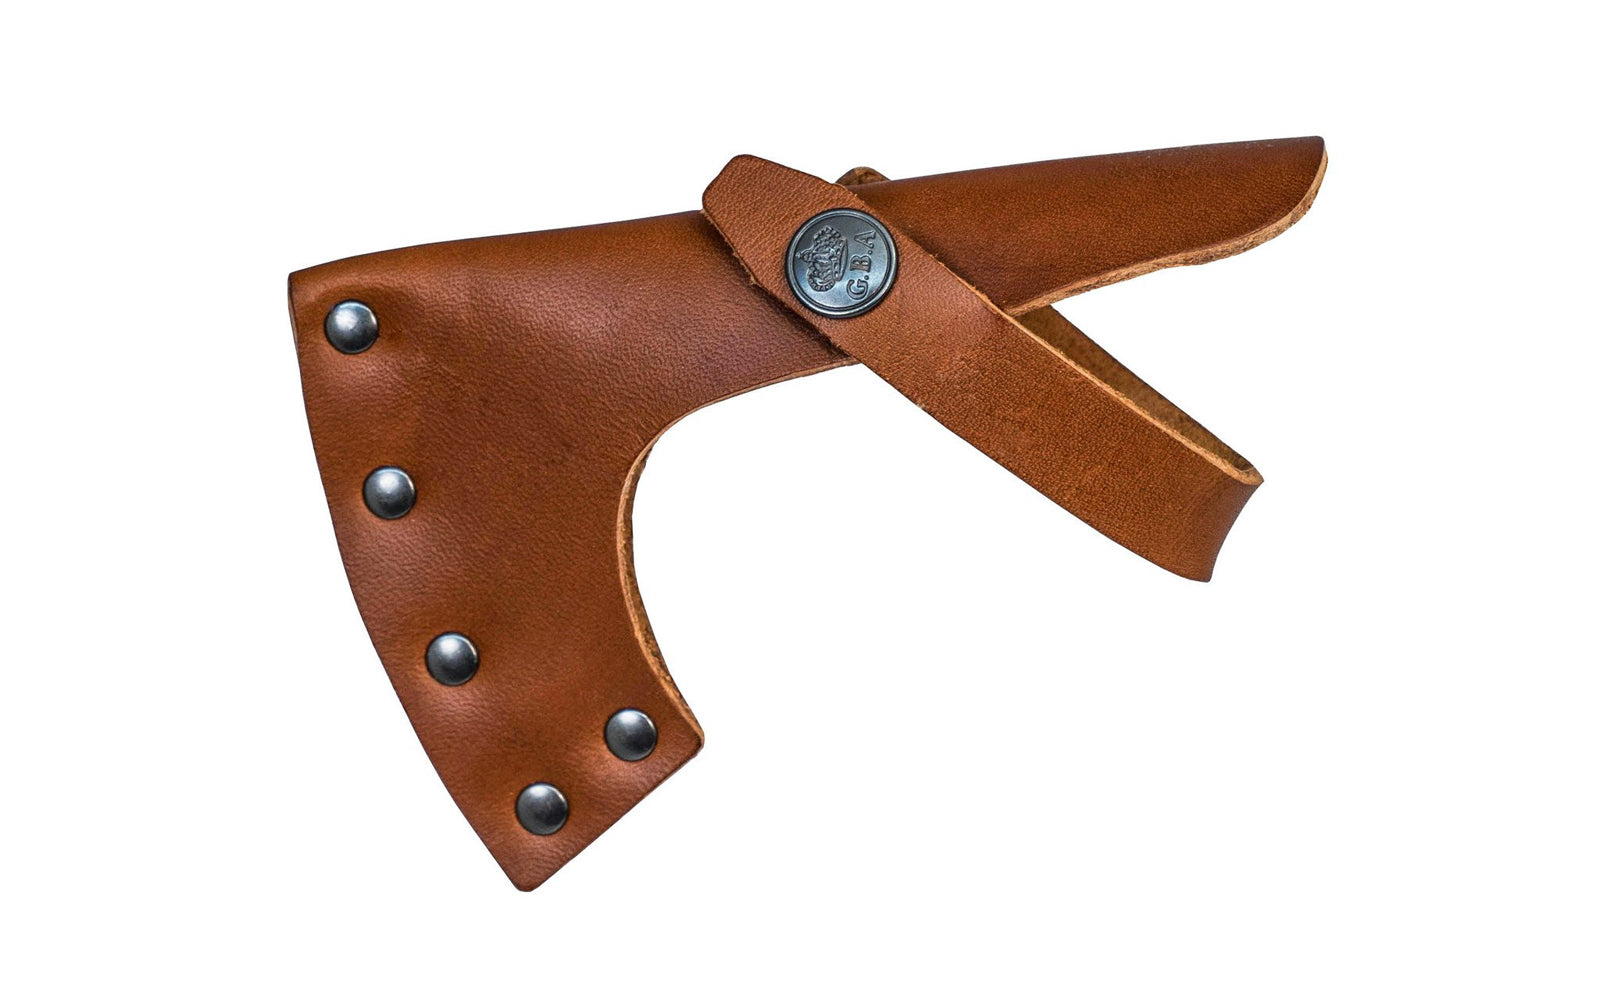 Gränsfors Bruk grain leather sheath is designed for the Hunter's Axe No. 418. The vegetable-tanned leather is free from heavy metals & is biodegradable. 7391765418081. Model 418C